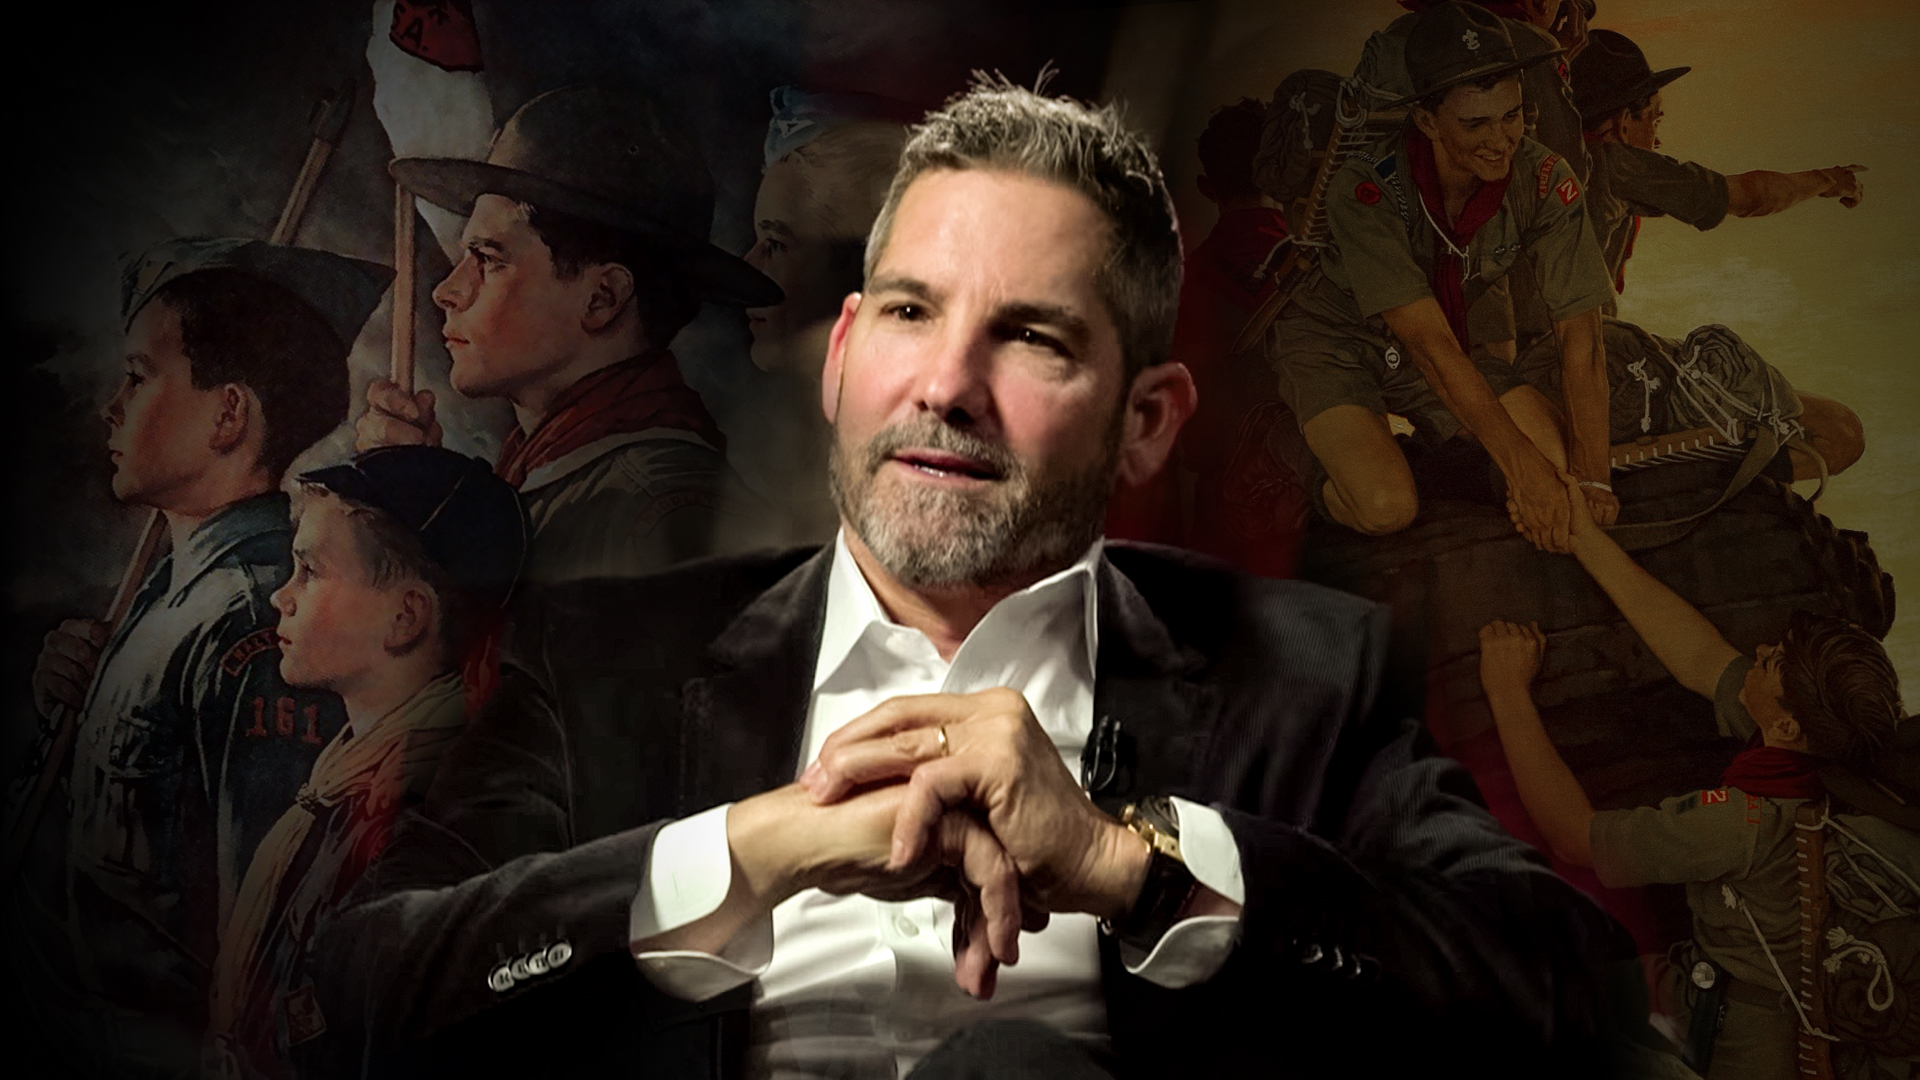 Grant Cardone makes Large Donation to Boy Scouts of America